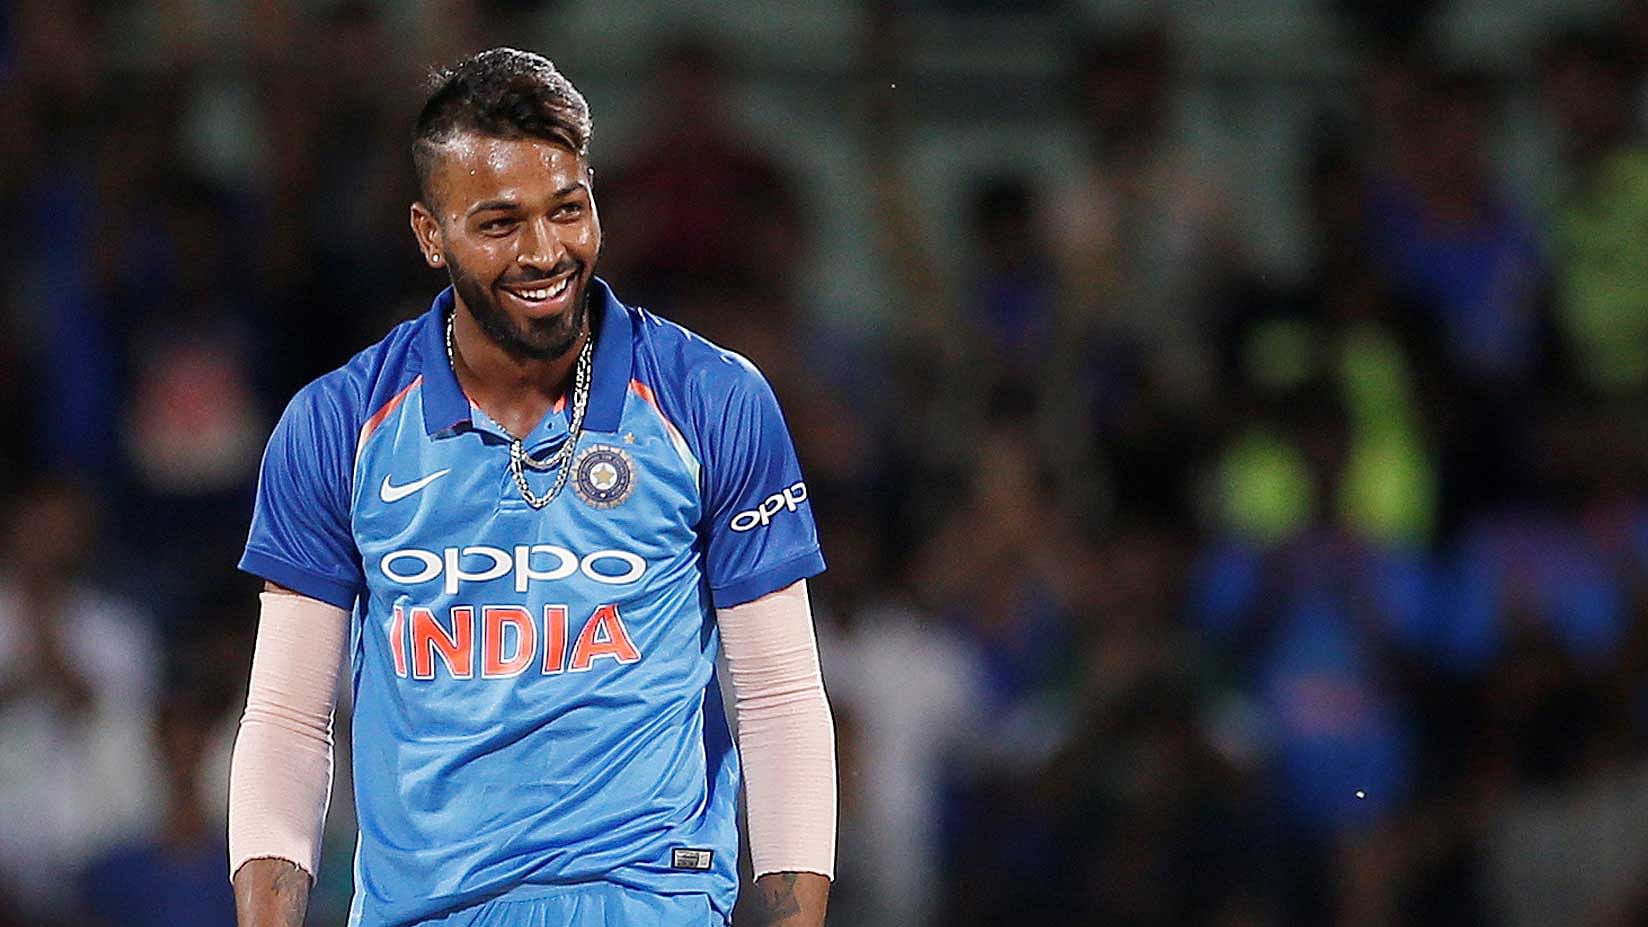 Following the CoA’s decision to lift their bans, Indian cricketers Hardik Pandya and KL Rahul are set to be back in action soon.